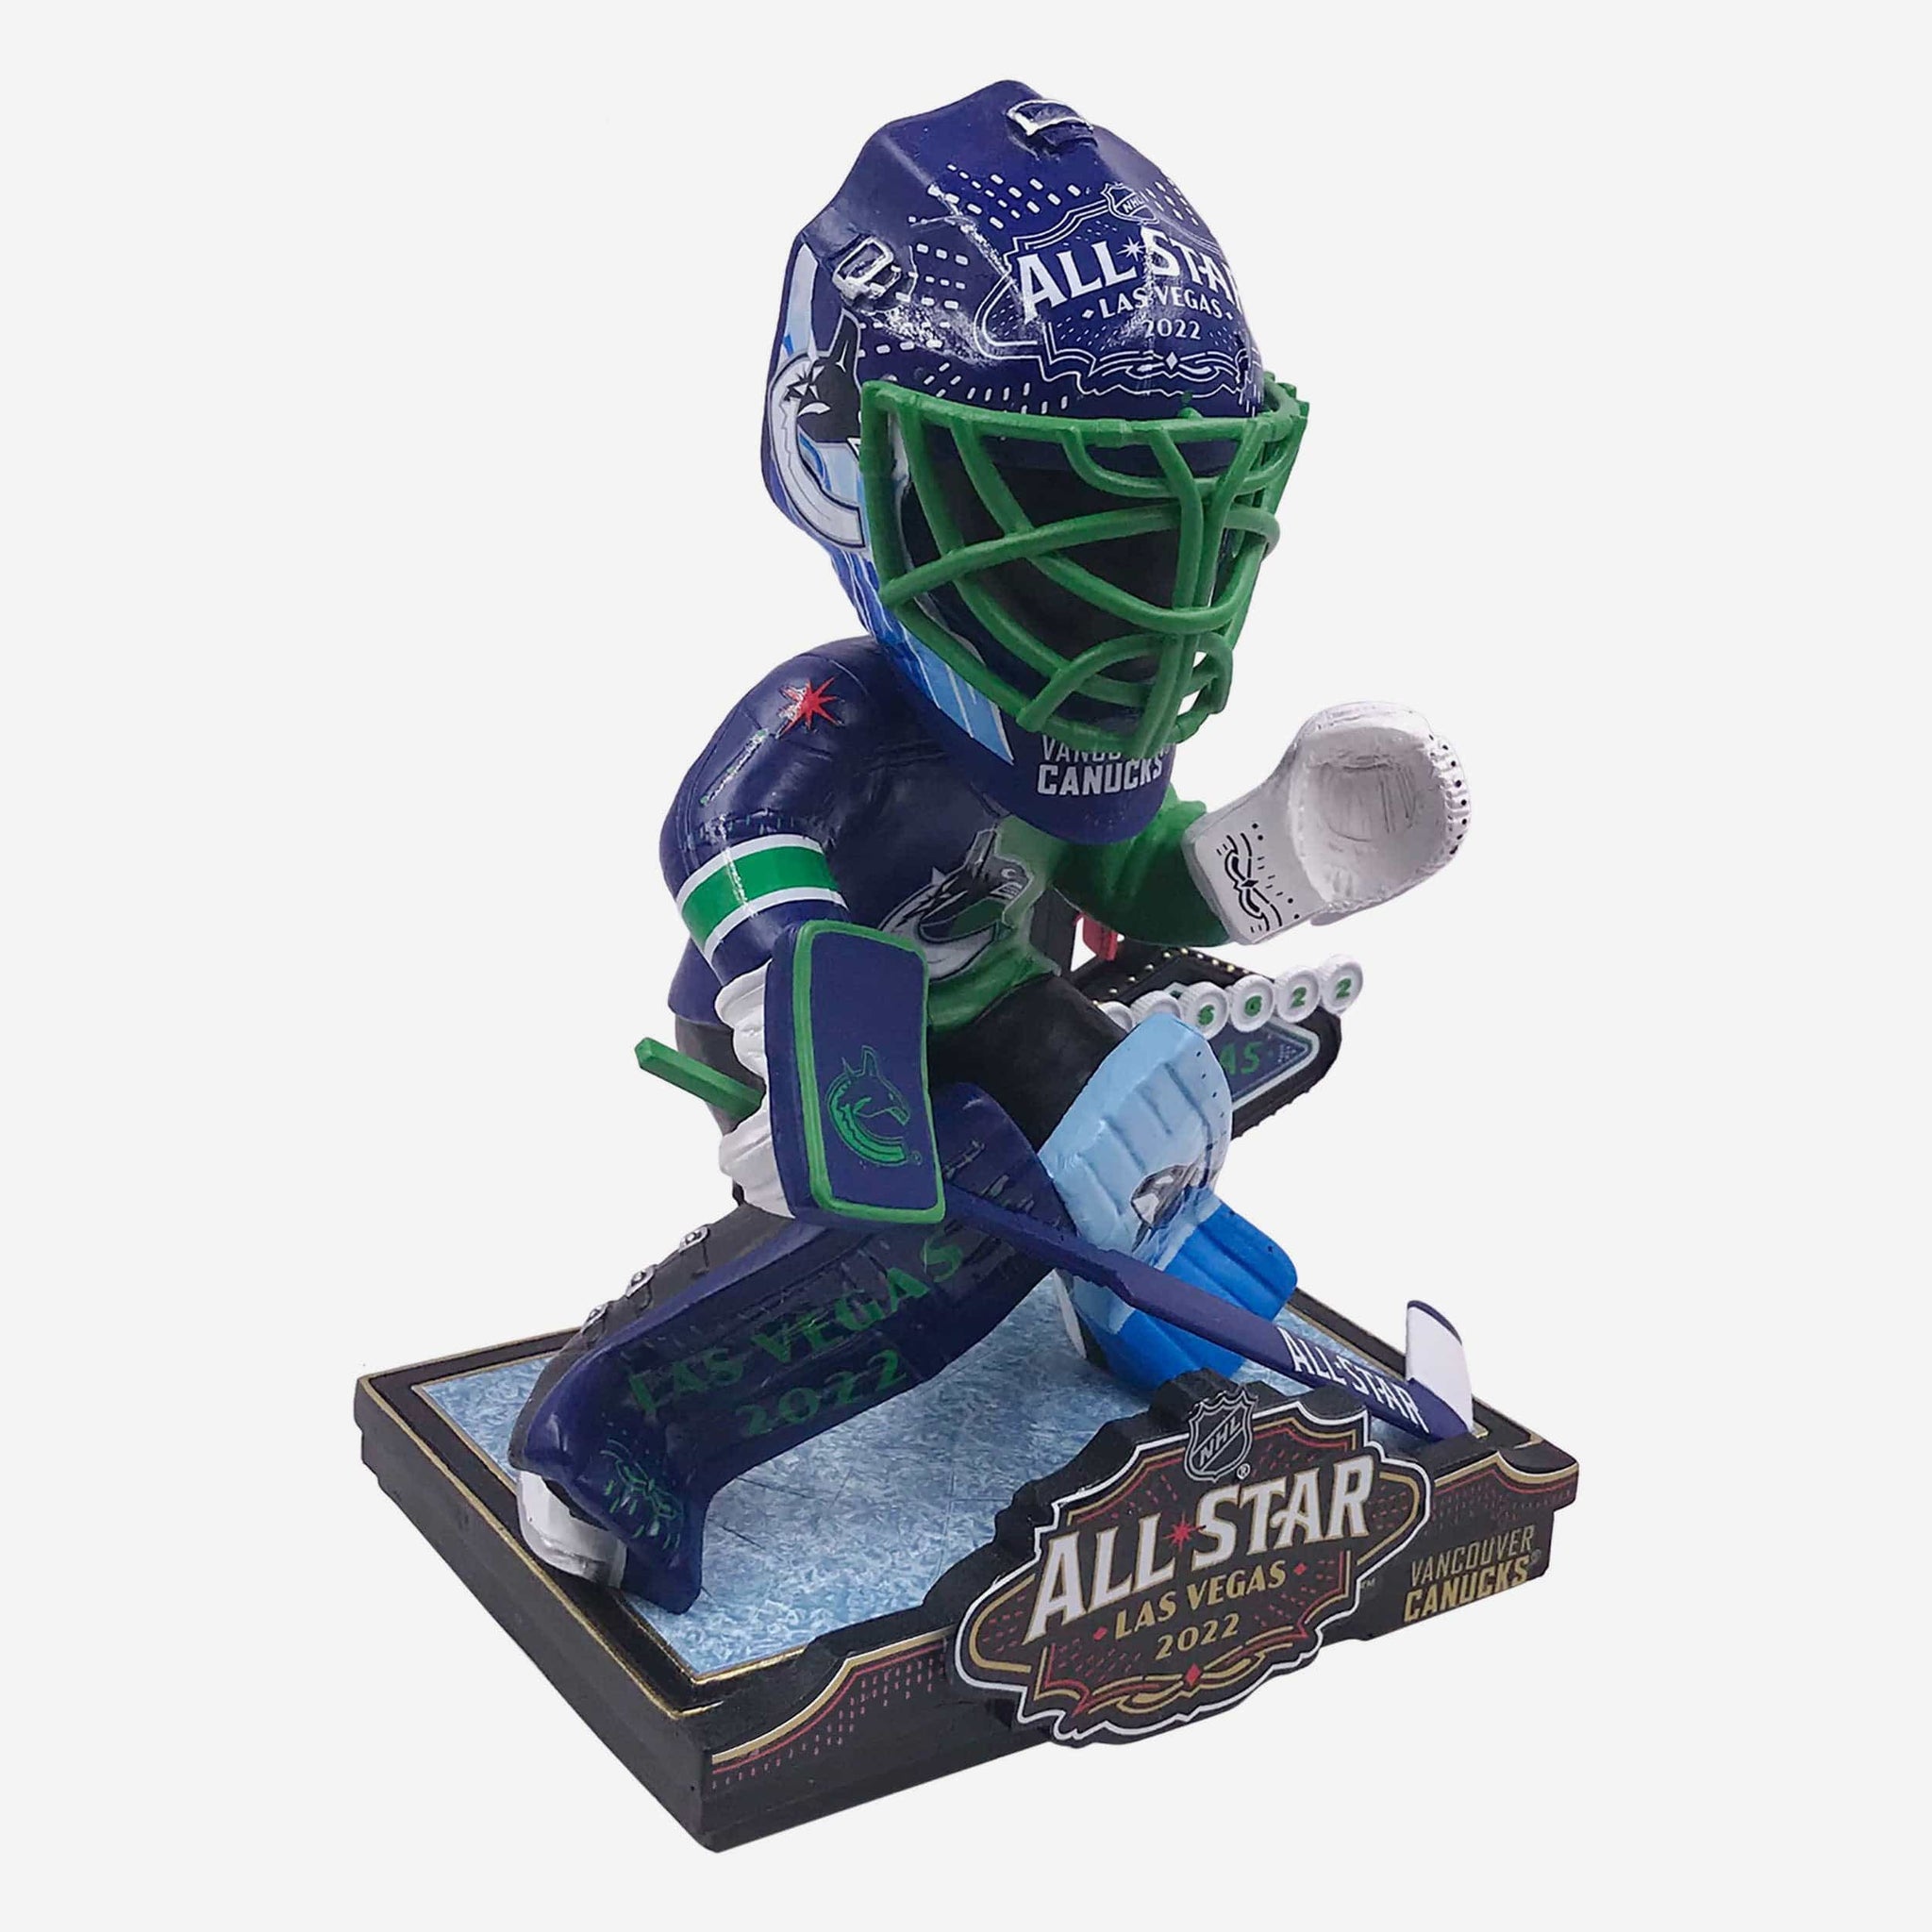 Vancouver Canucks release first look of special limited edition